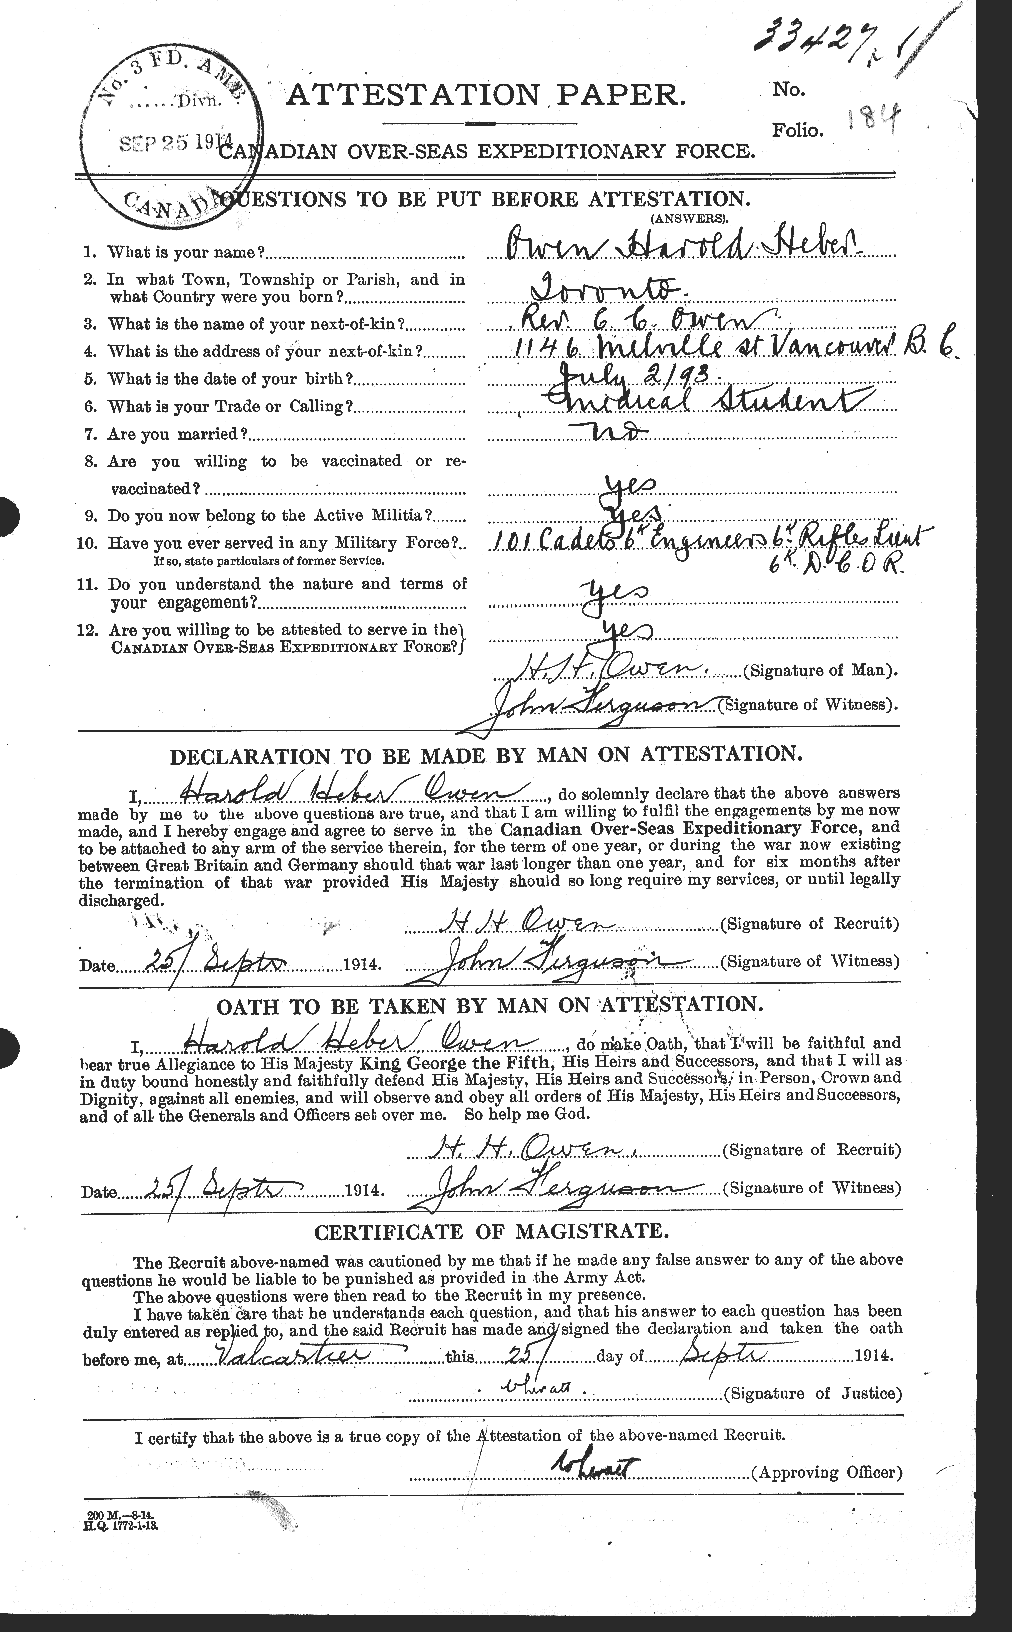 Personnel Records of the First World War - CEF 561279a